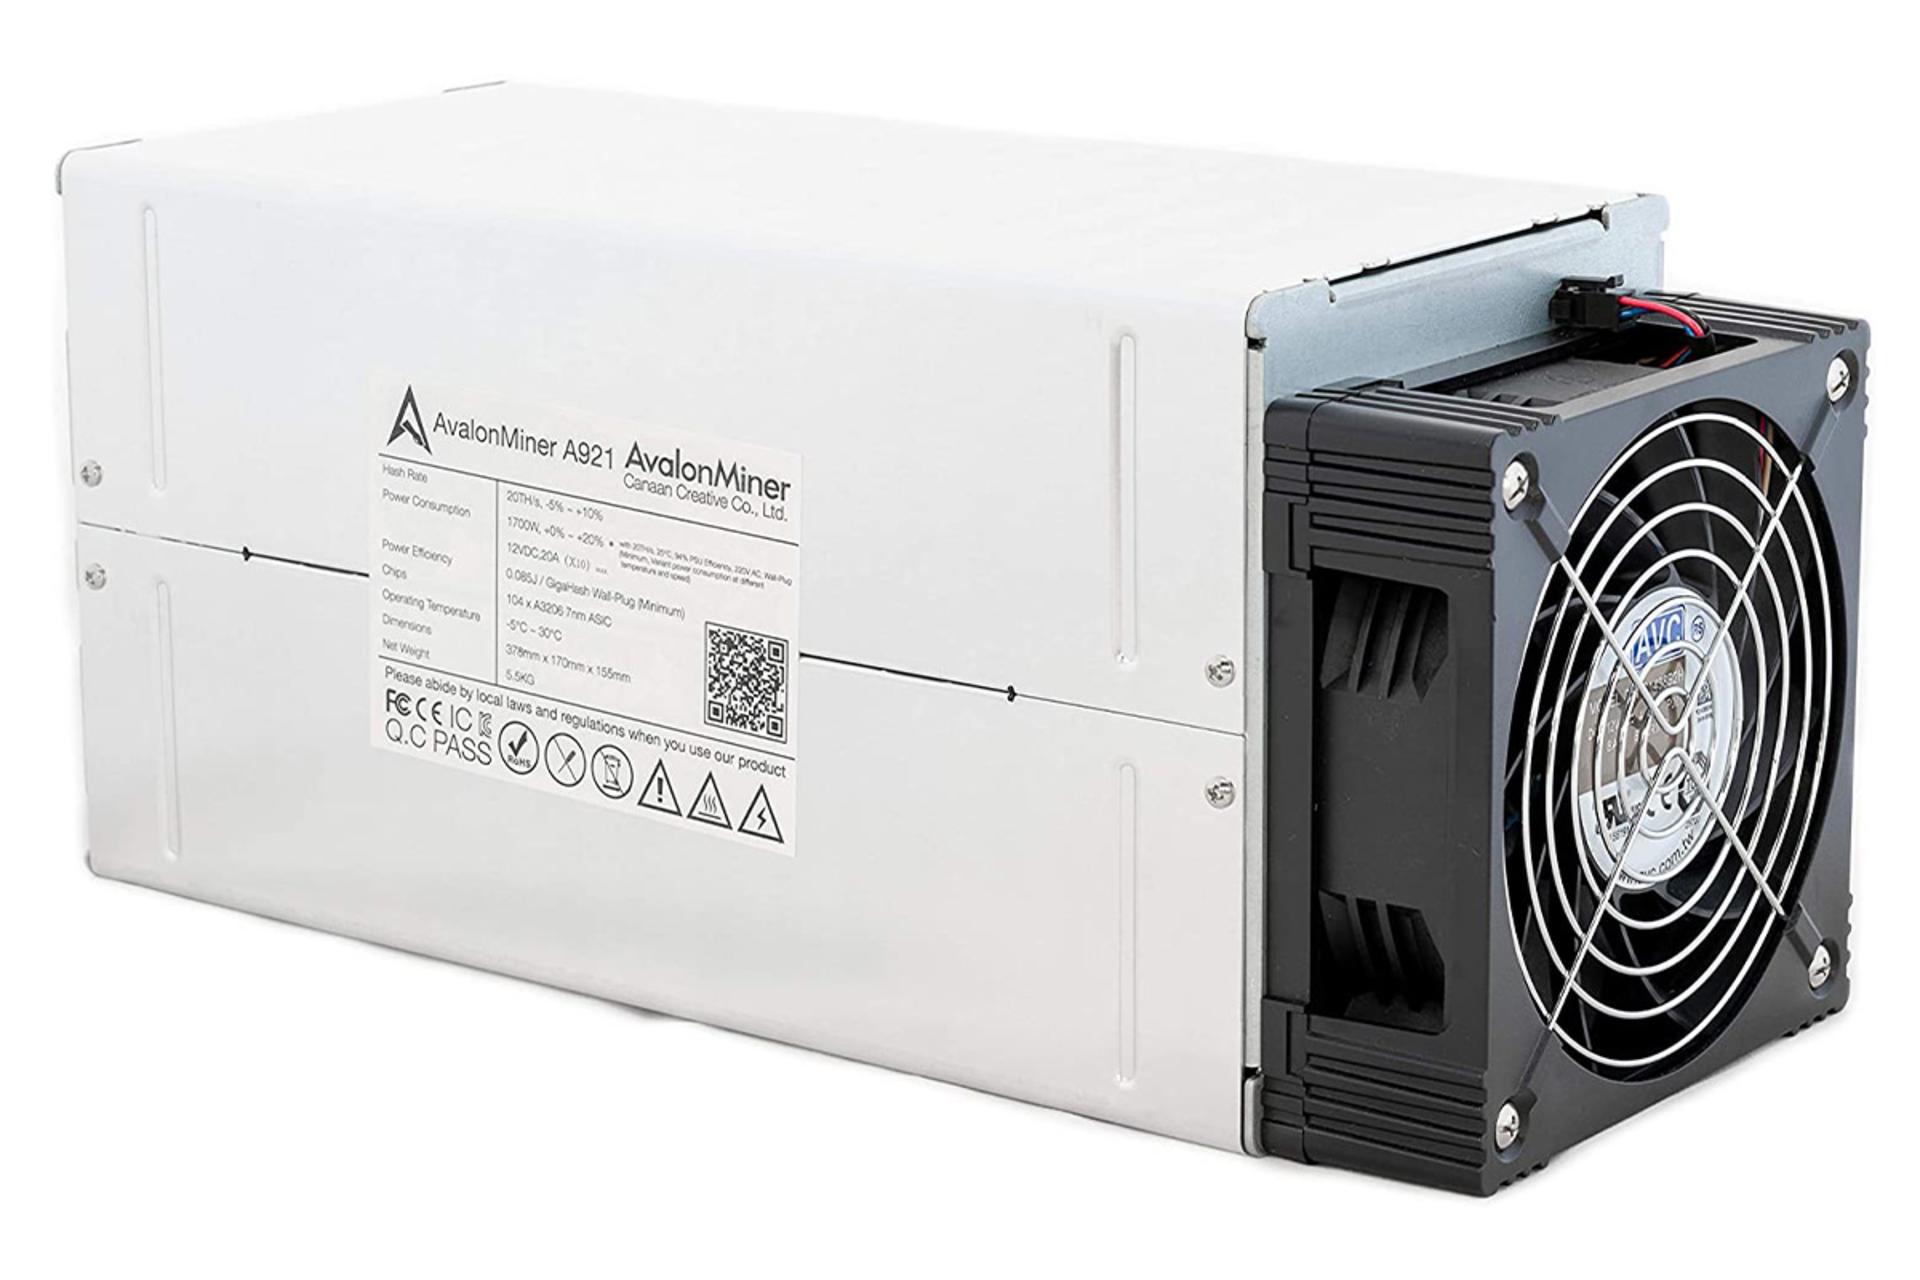 Canaan AvalonMiner 921 / کنان AvalonMiner 921